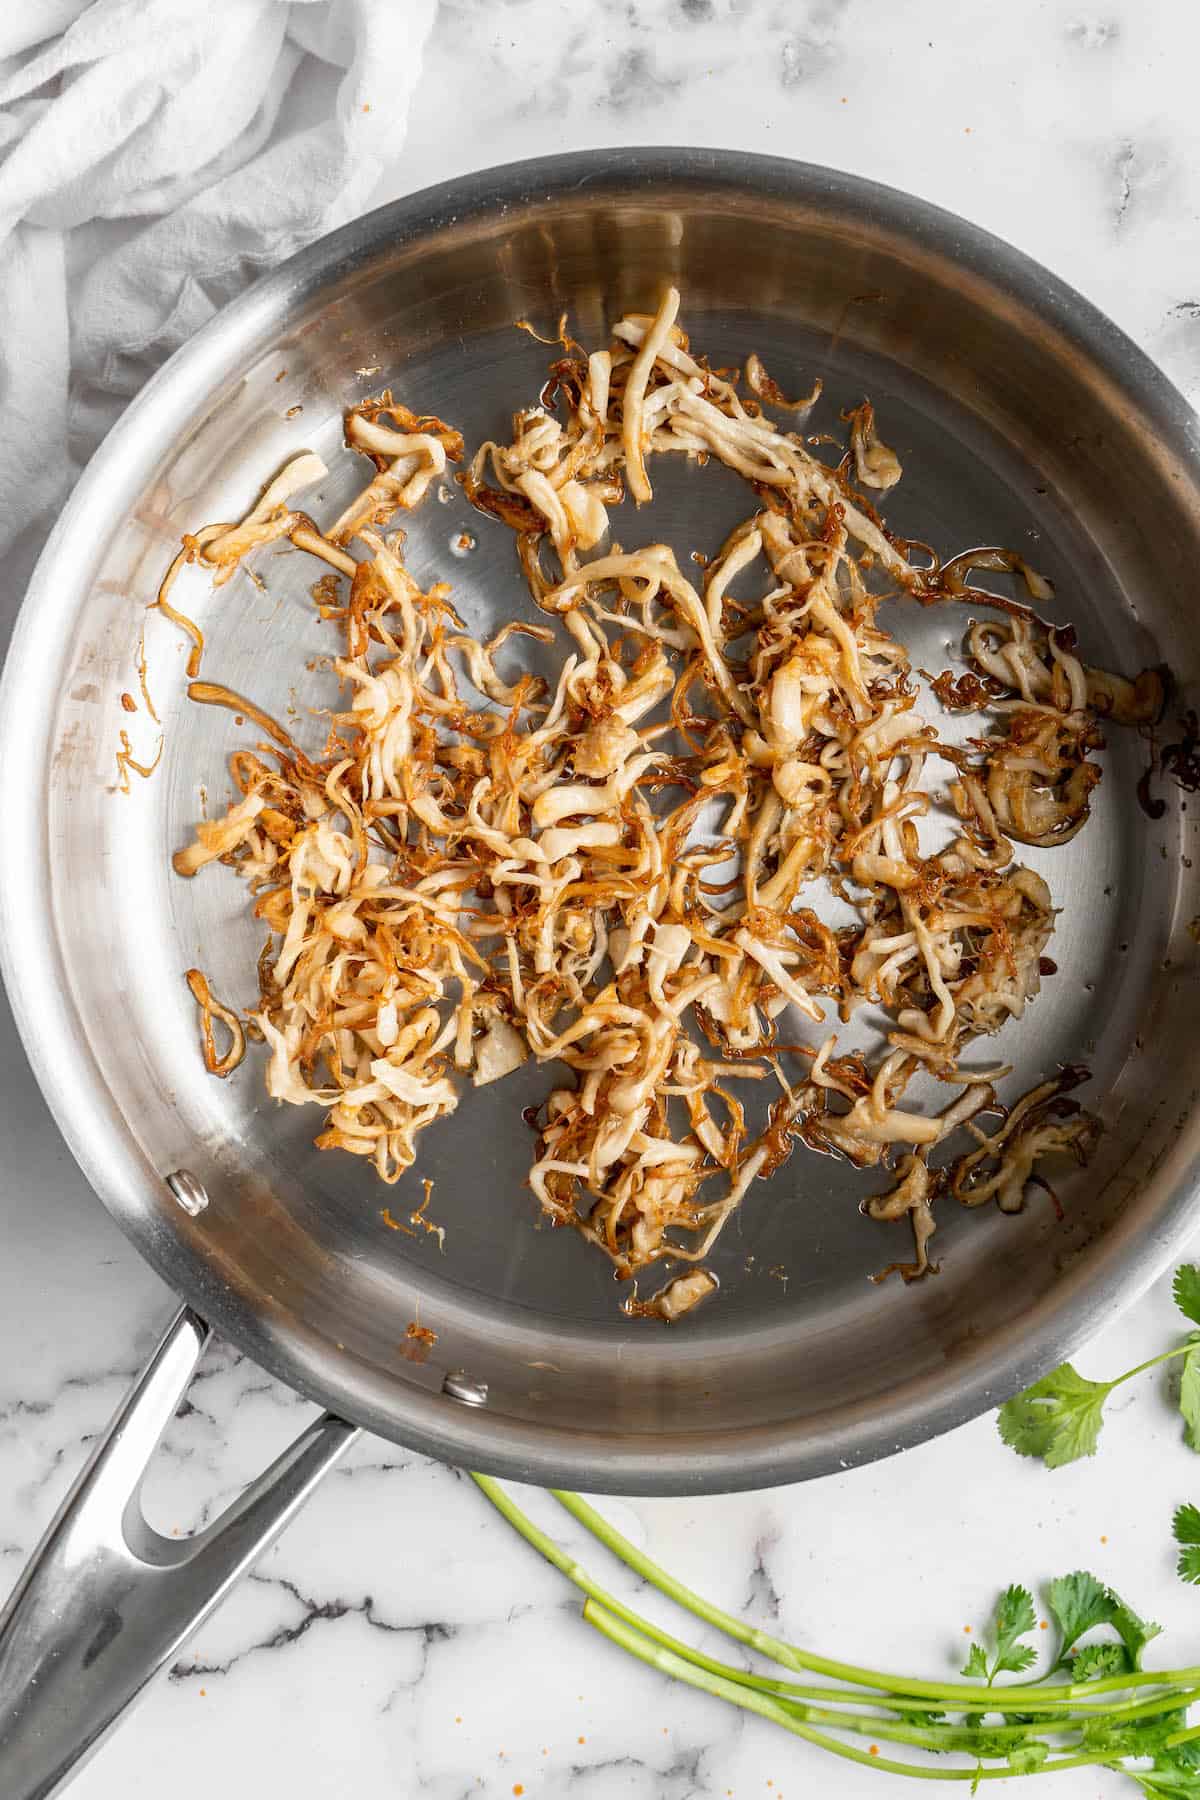 Overhead view of shredded oyster mushrooms in skillet